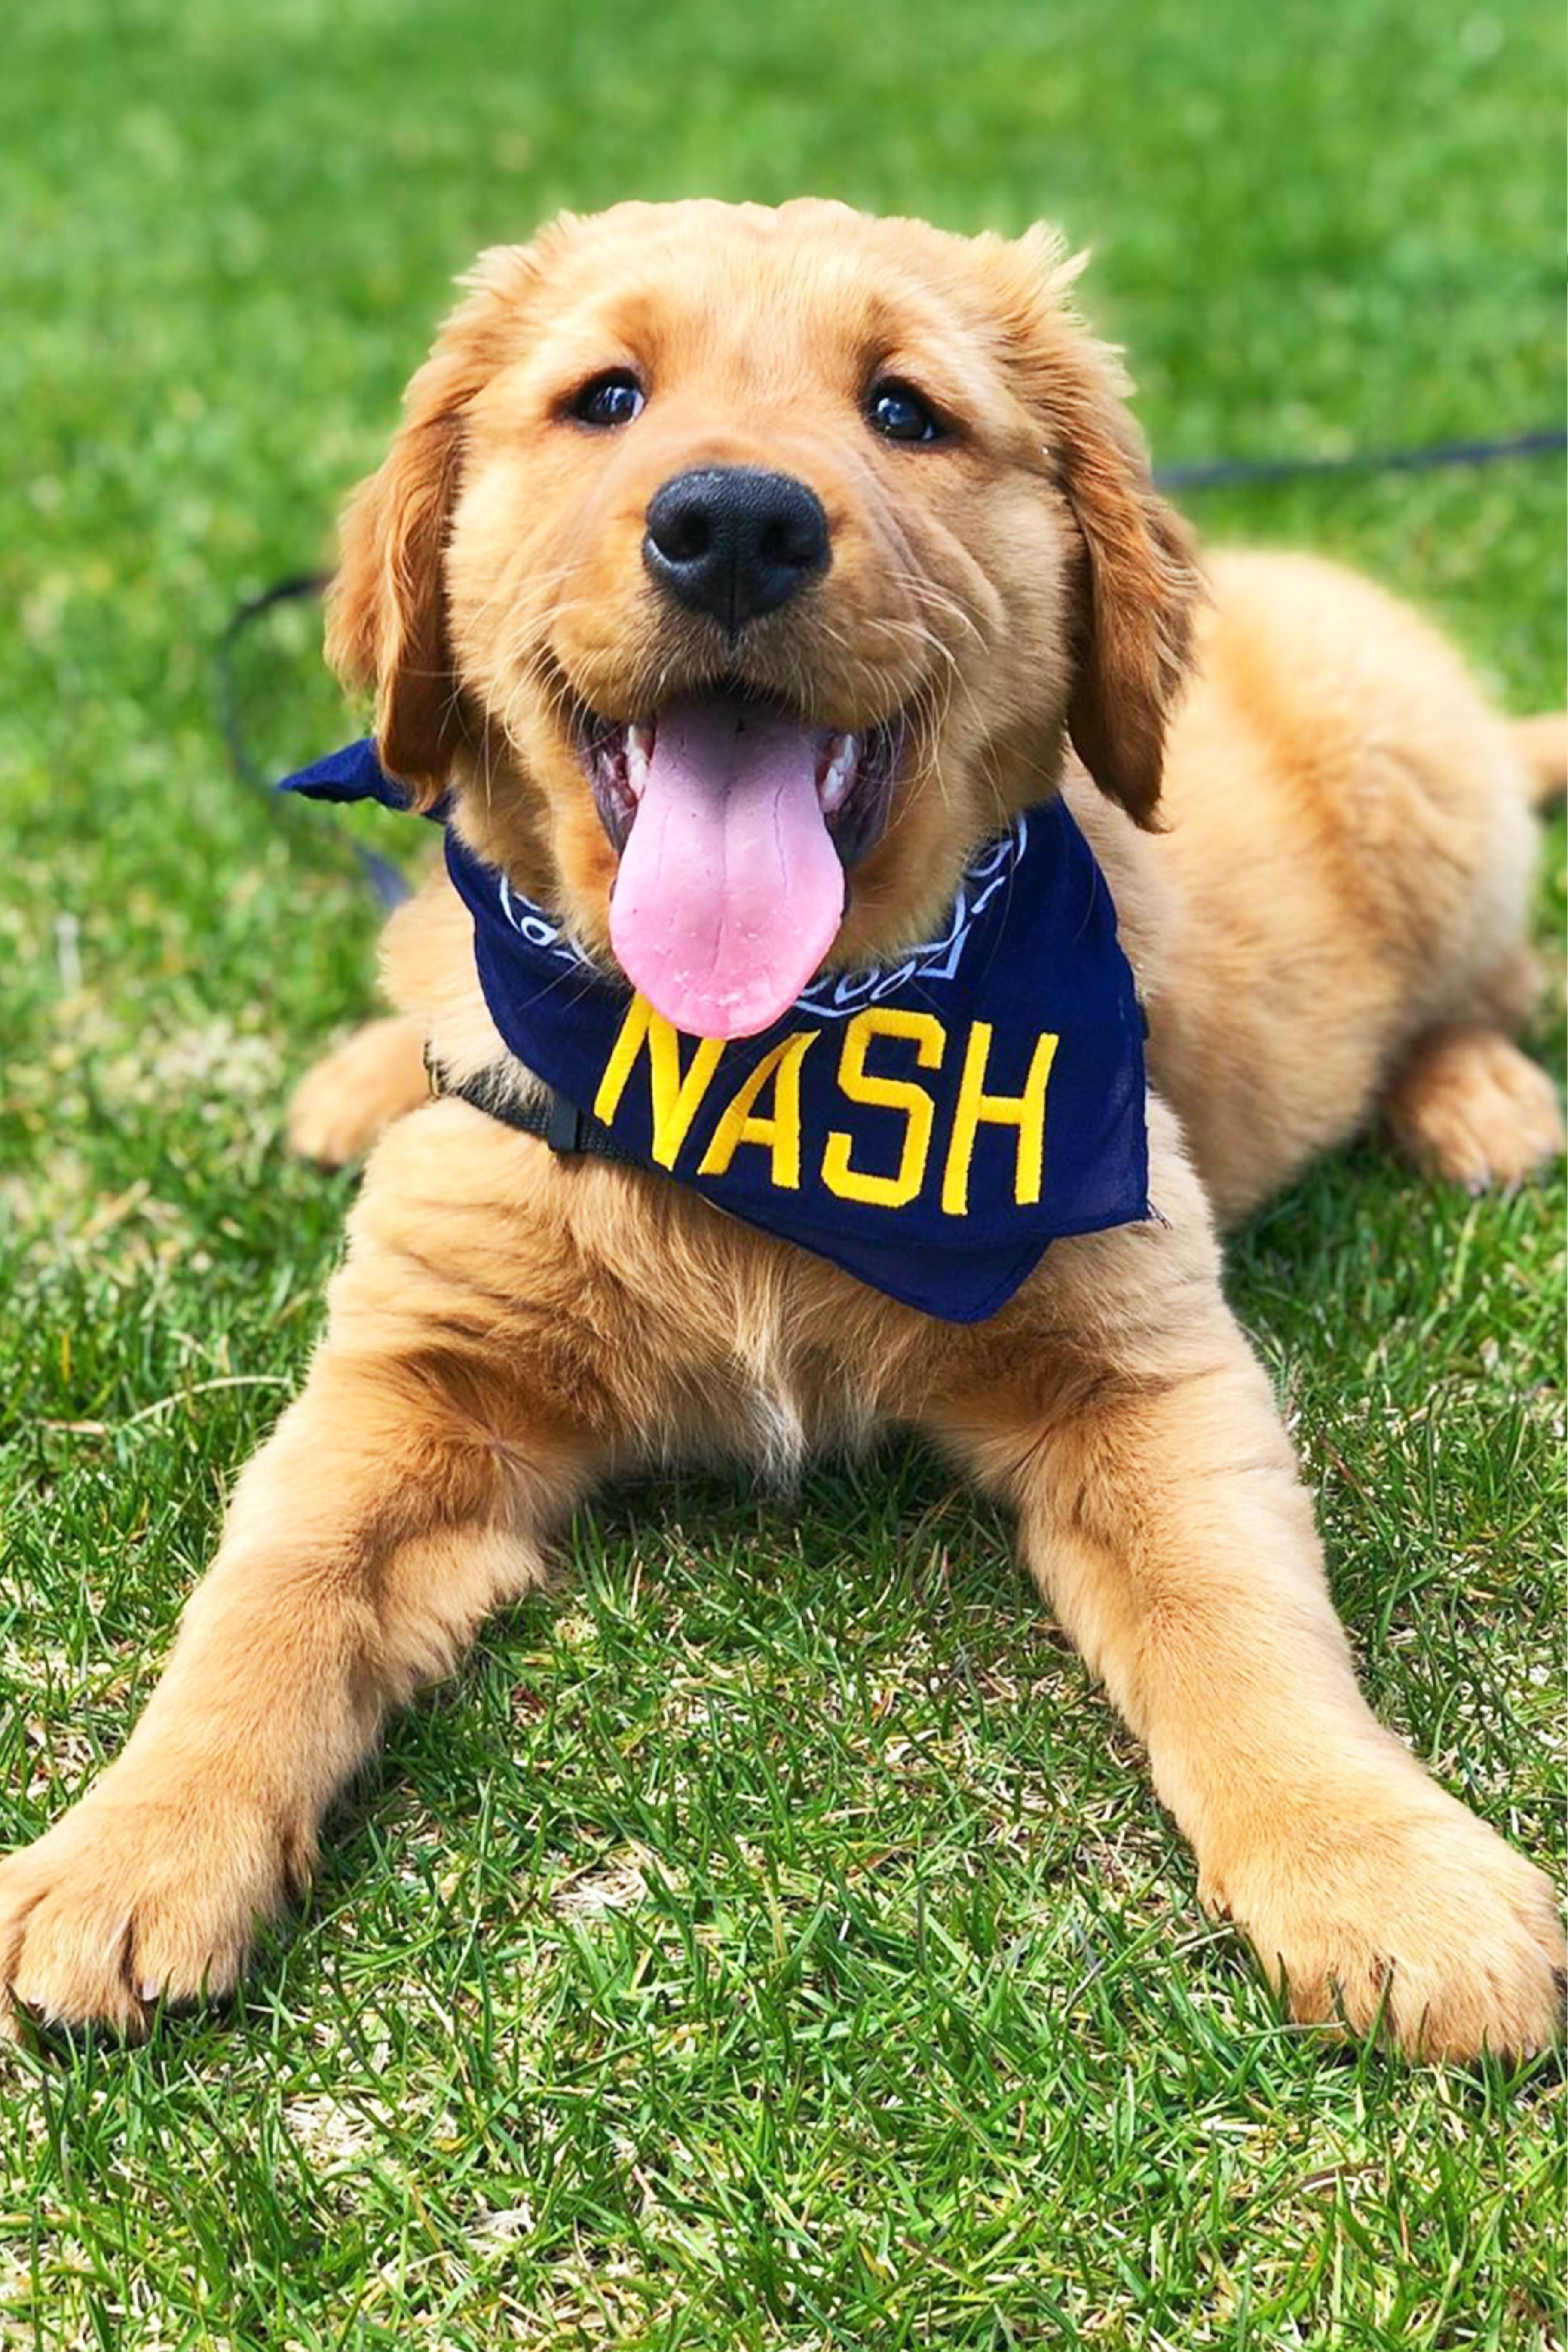 Puppy retriever wearing navy bandana with gold embroidered NASH 